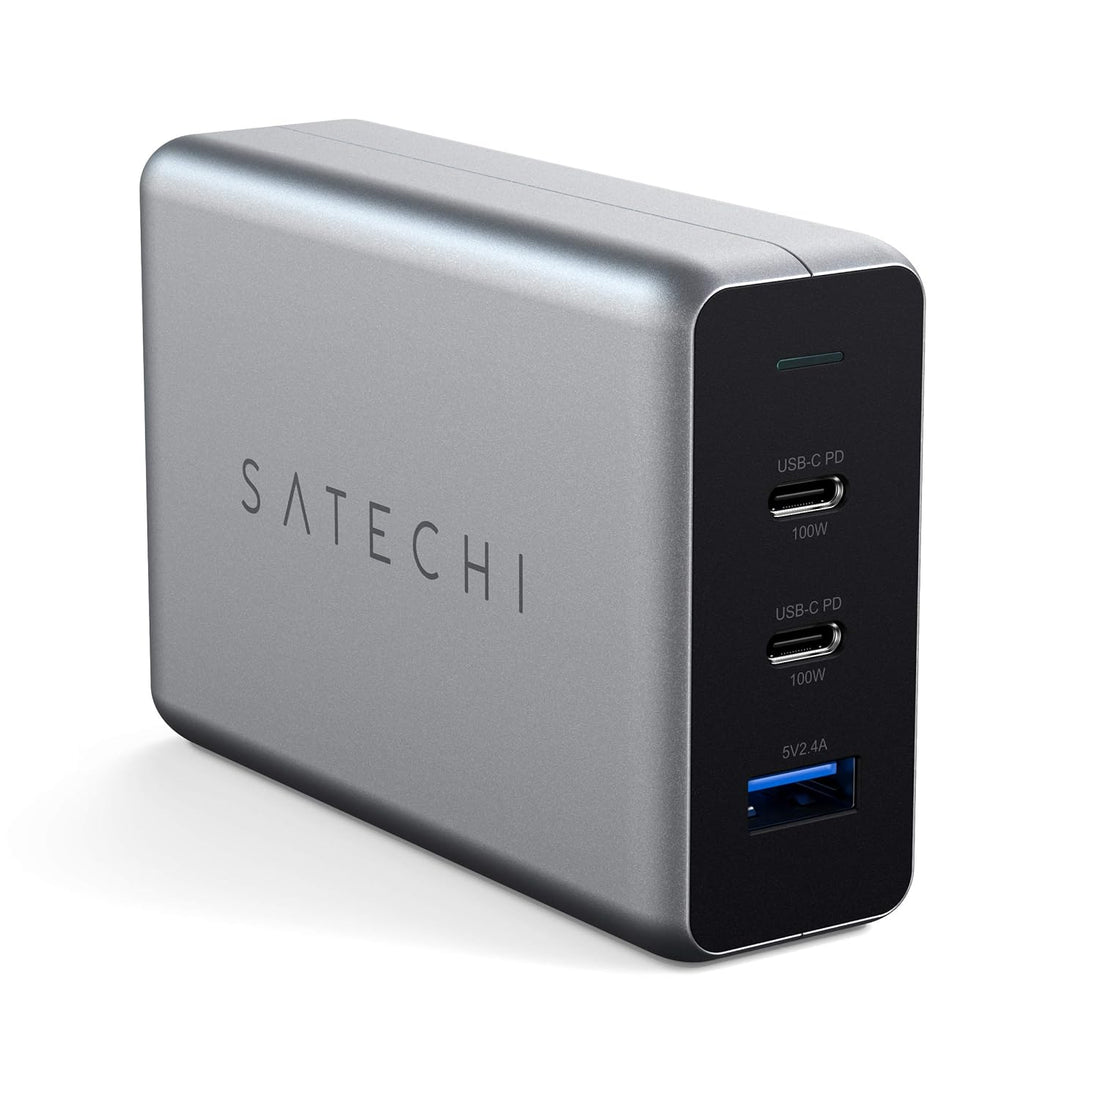 Satechi 100W USB-C PD Compact GaN Charger – Powerful GaN Tech – Compatible with 2020 MacBook Pro 16-inch, 2020 MacBook Air M1, 2020 iPad Pro, 2020 iPad Air, iPhone 12 Pro Max/12 Pro/12 Mini/12